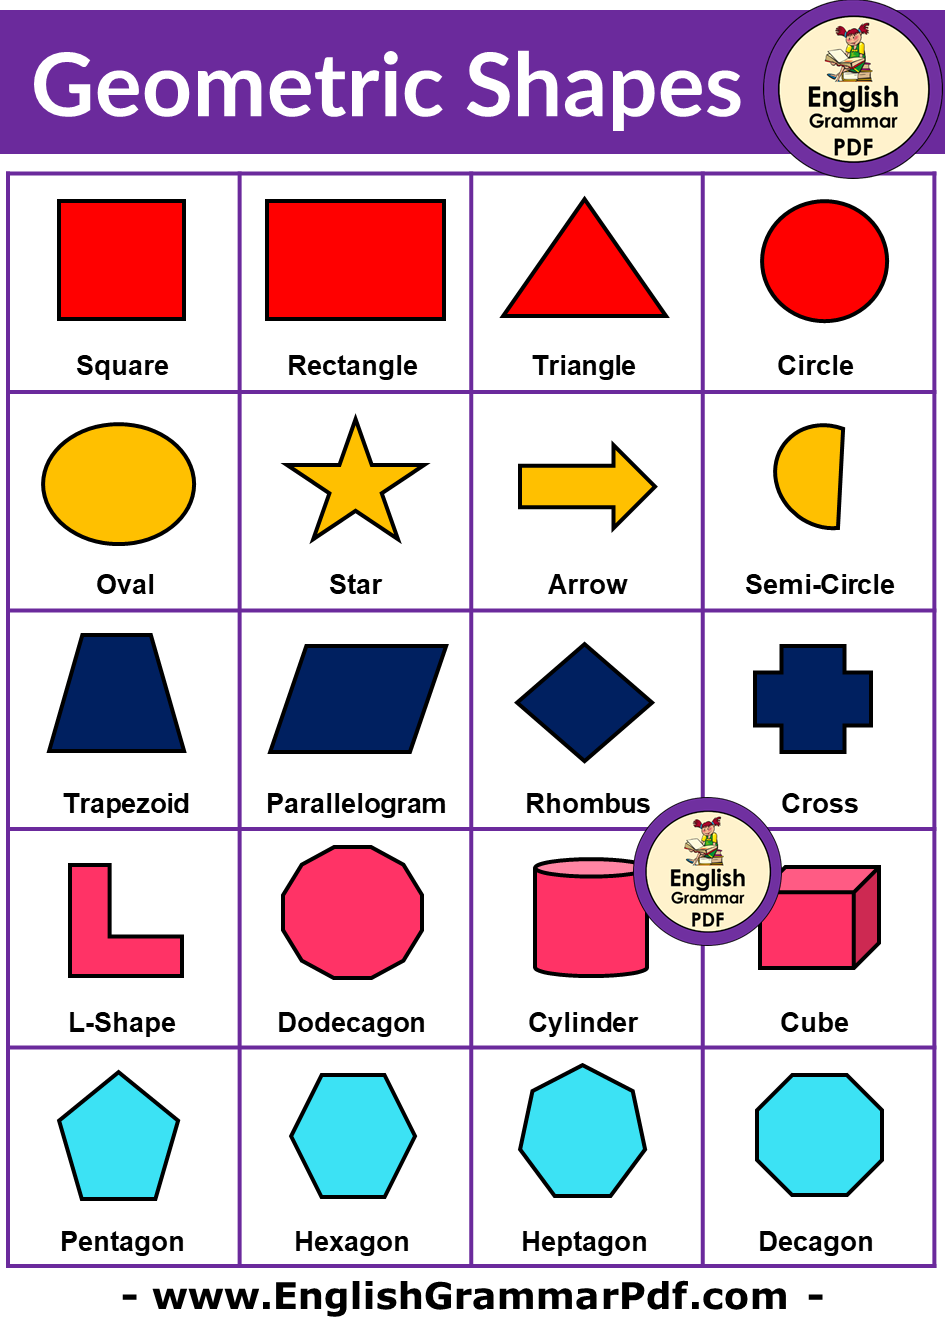 Geometric Shapes Names, Geometric Figures and Pictures